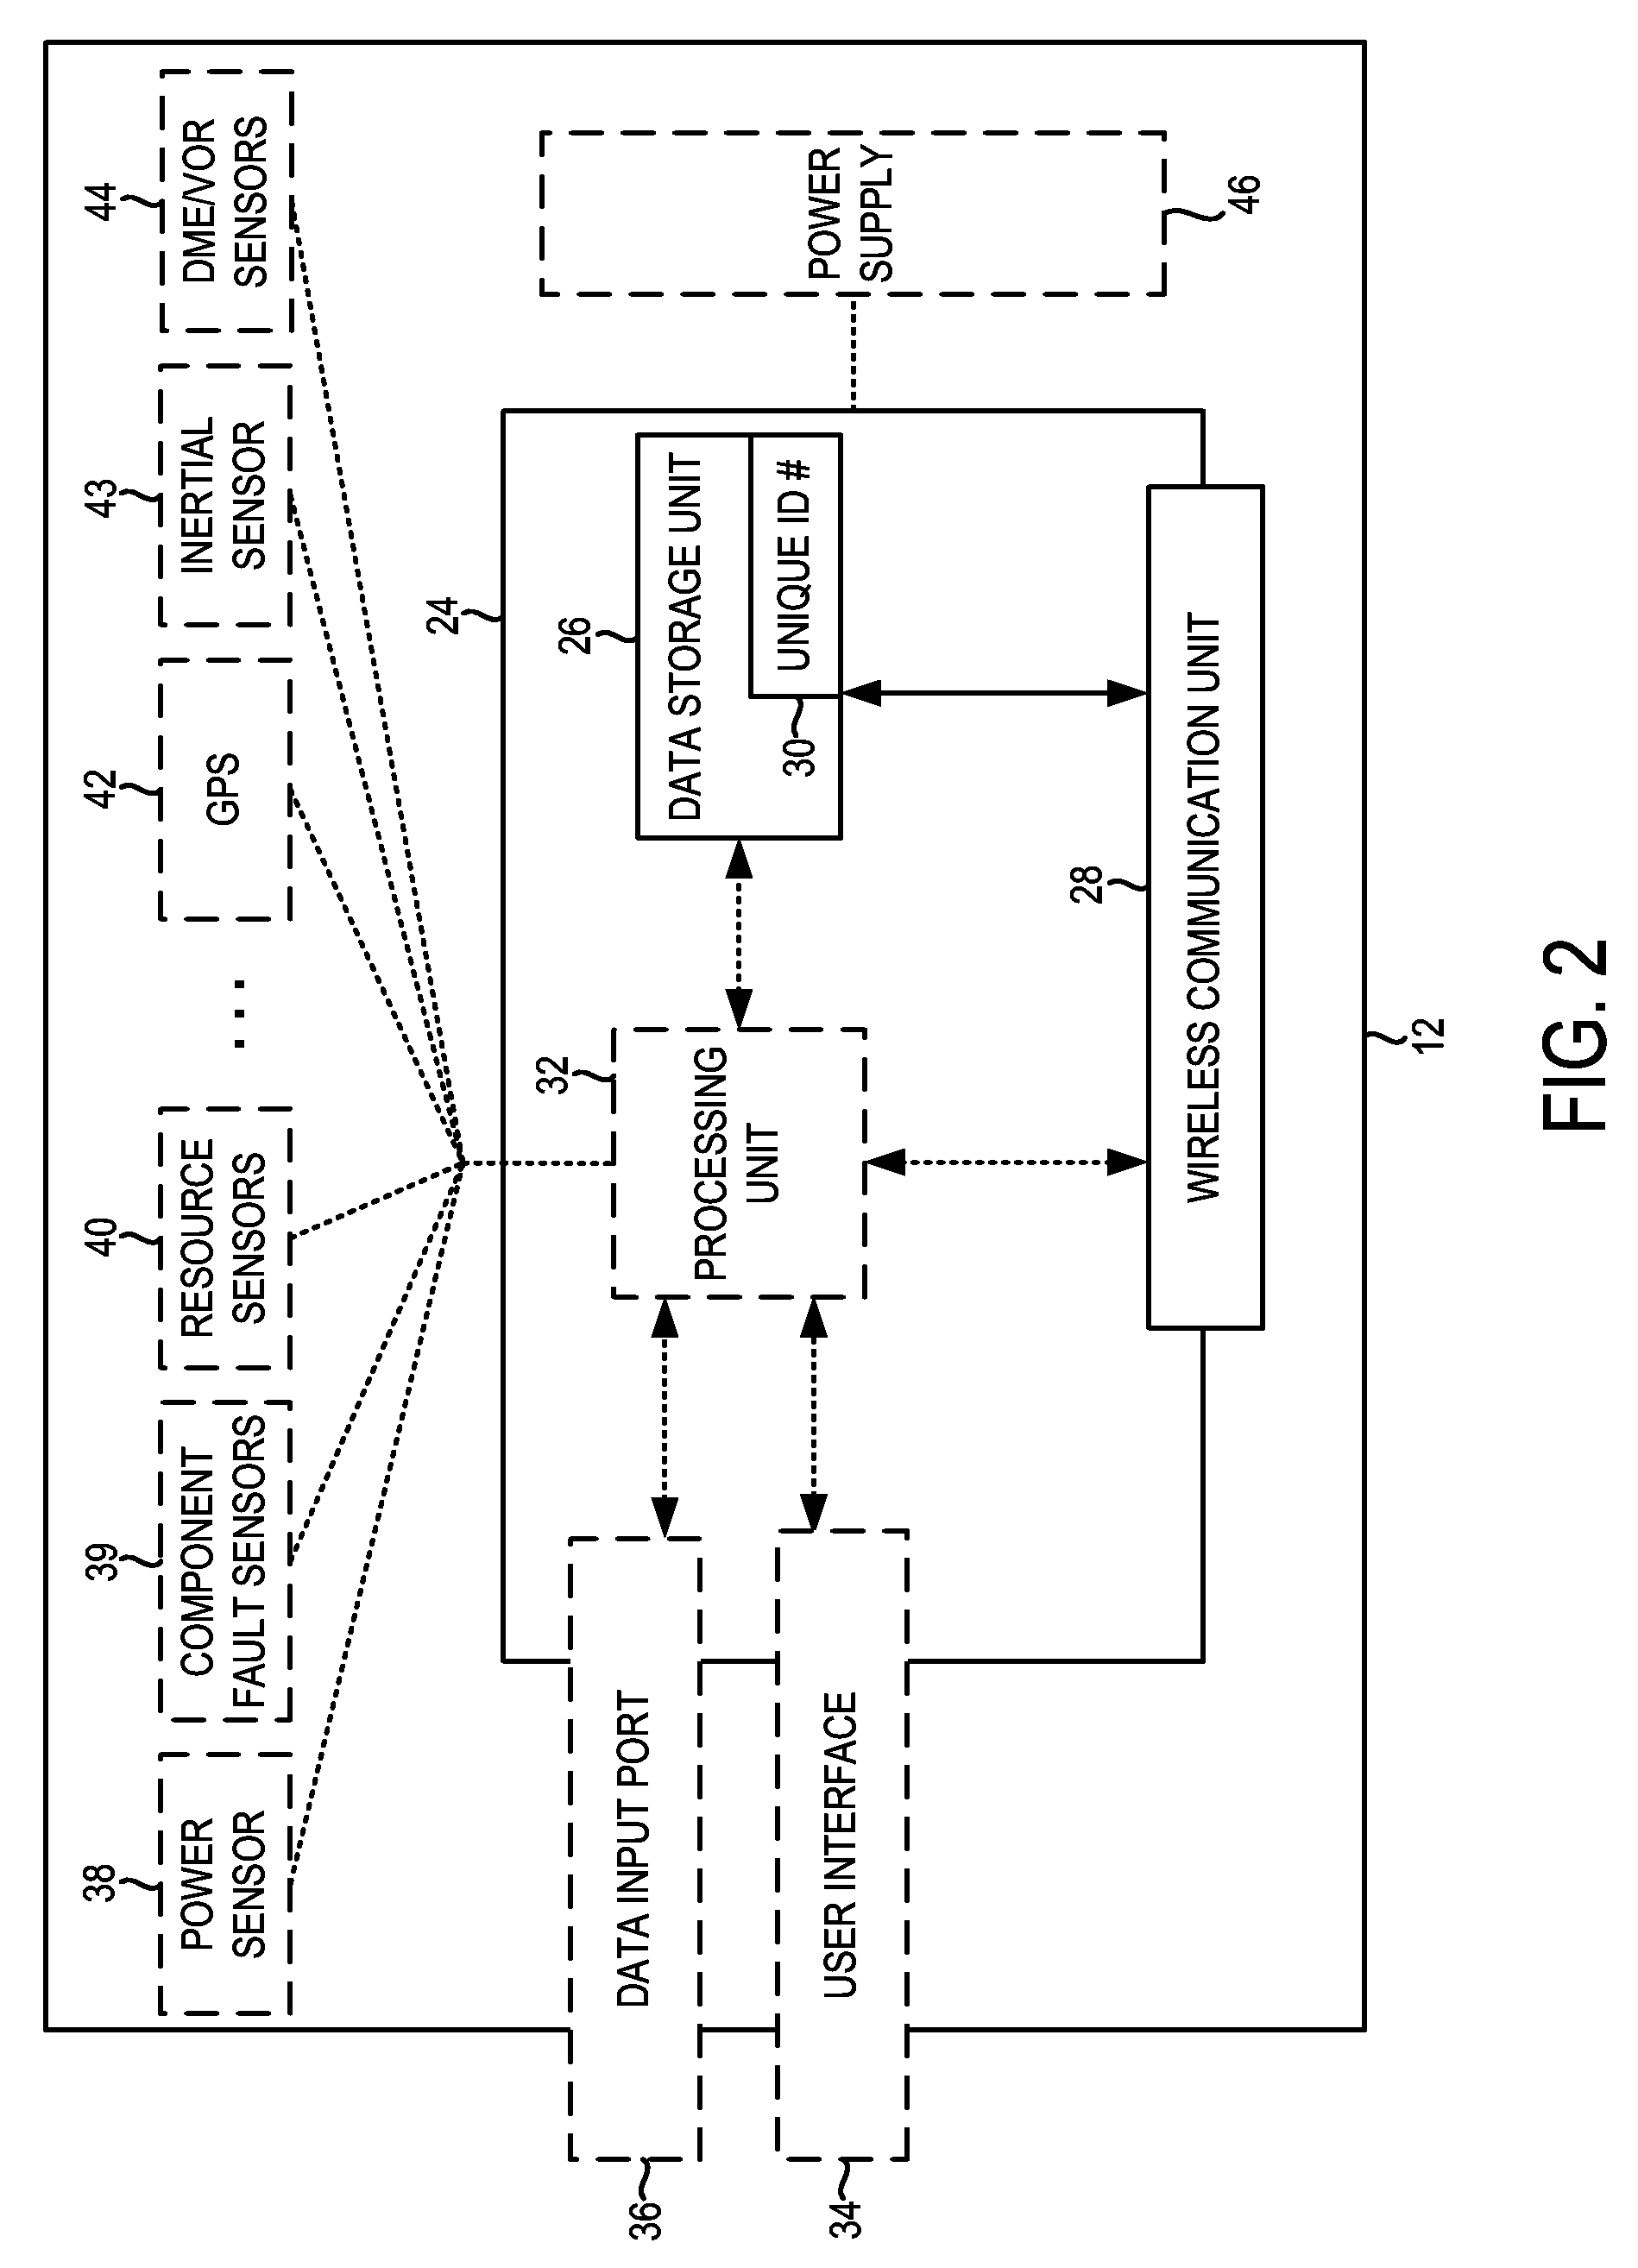 Wireless system for prevantative maintenance of welding-type devices